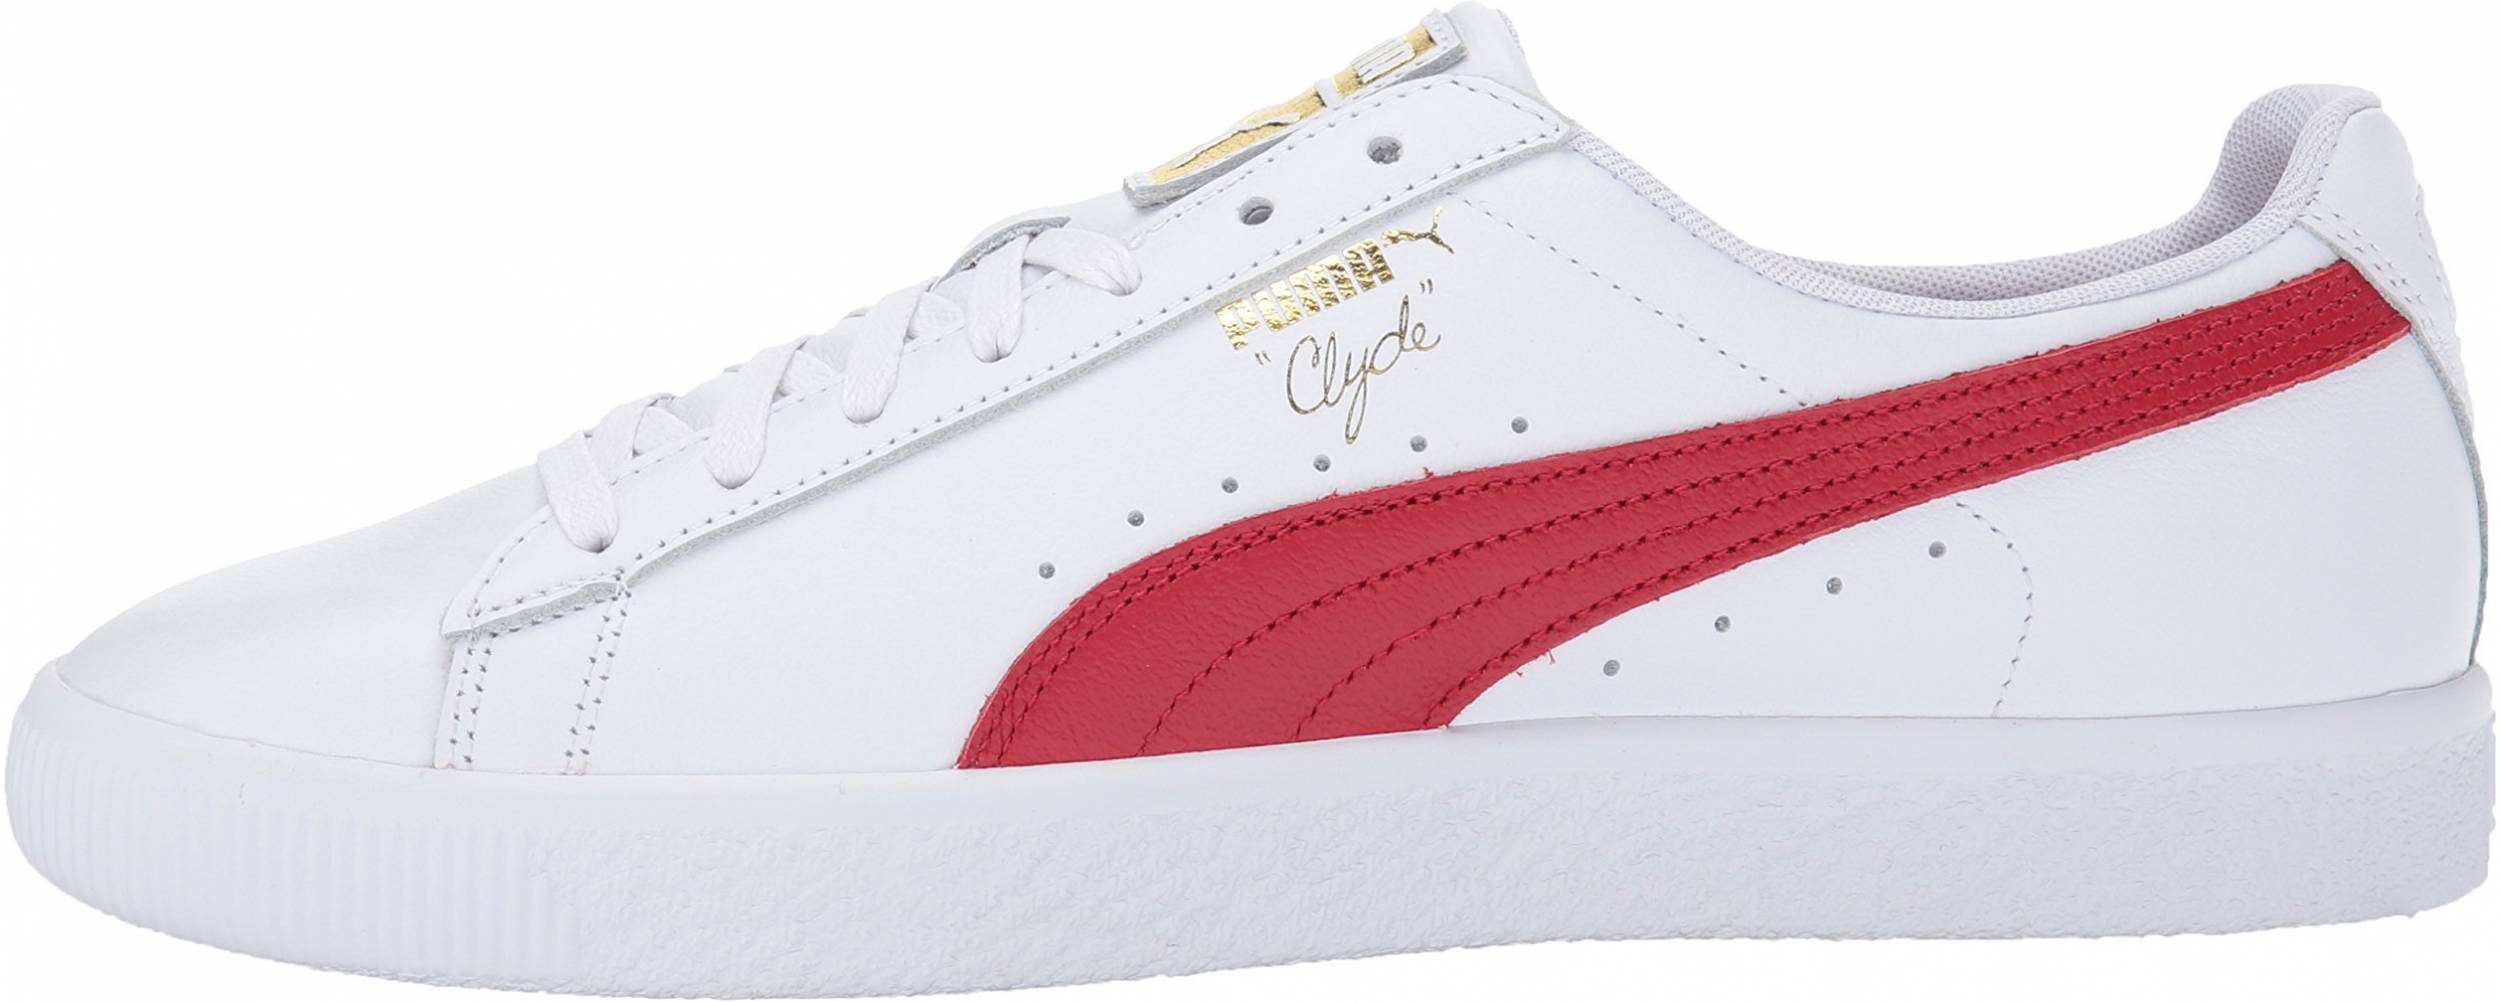 Save 38% on White Puma Sneakers (60 